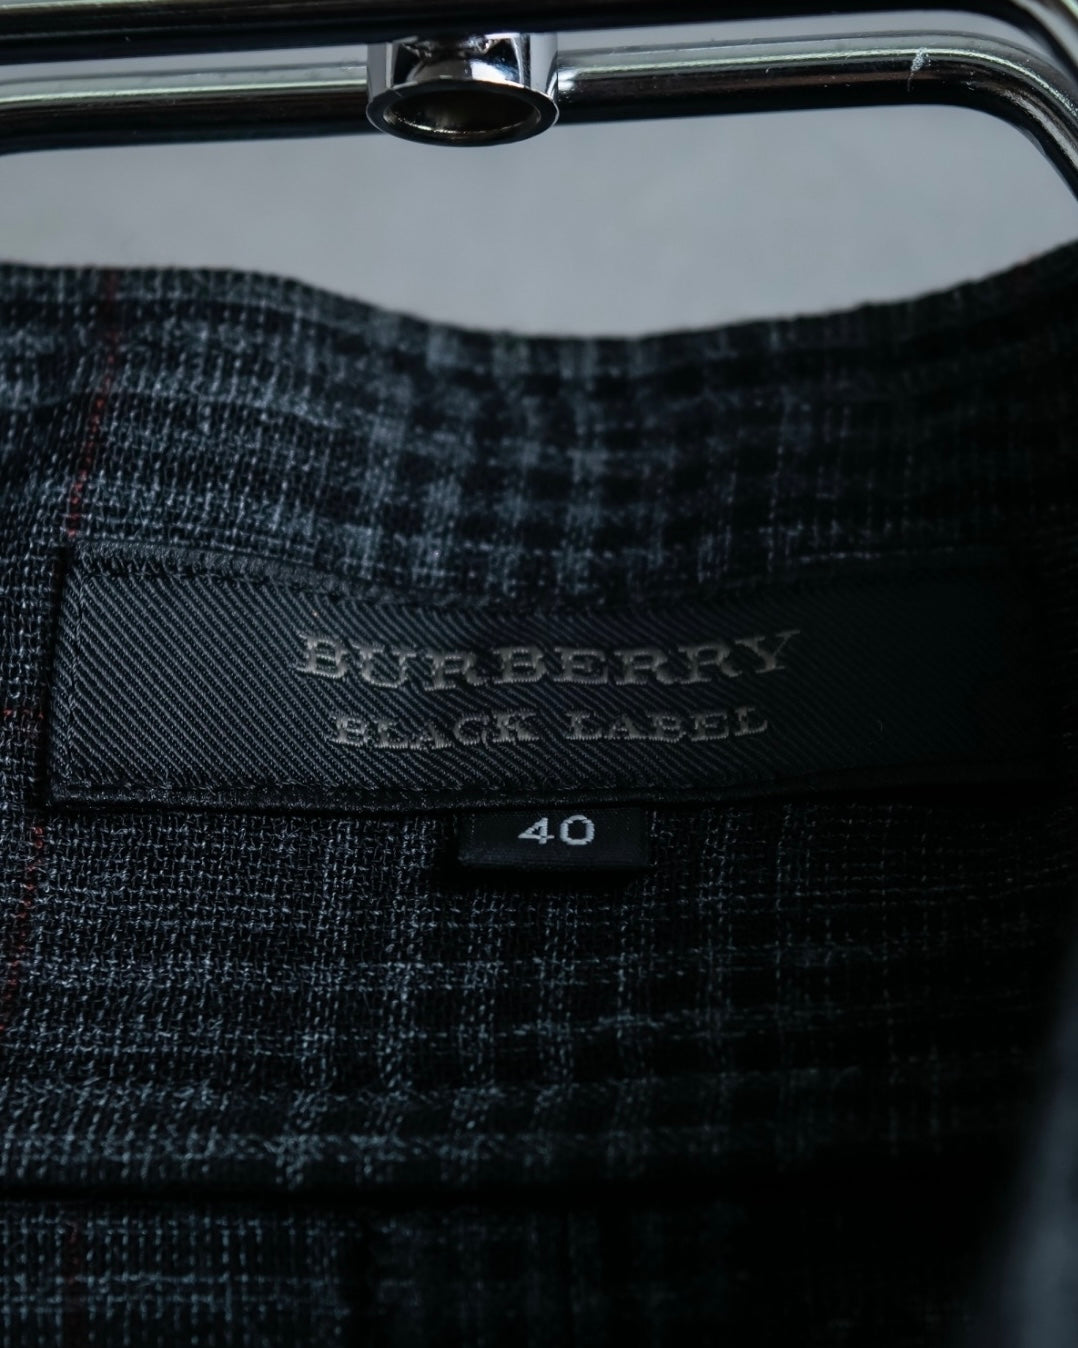 “Burberry Black Label” Trench coat designed long check shirts